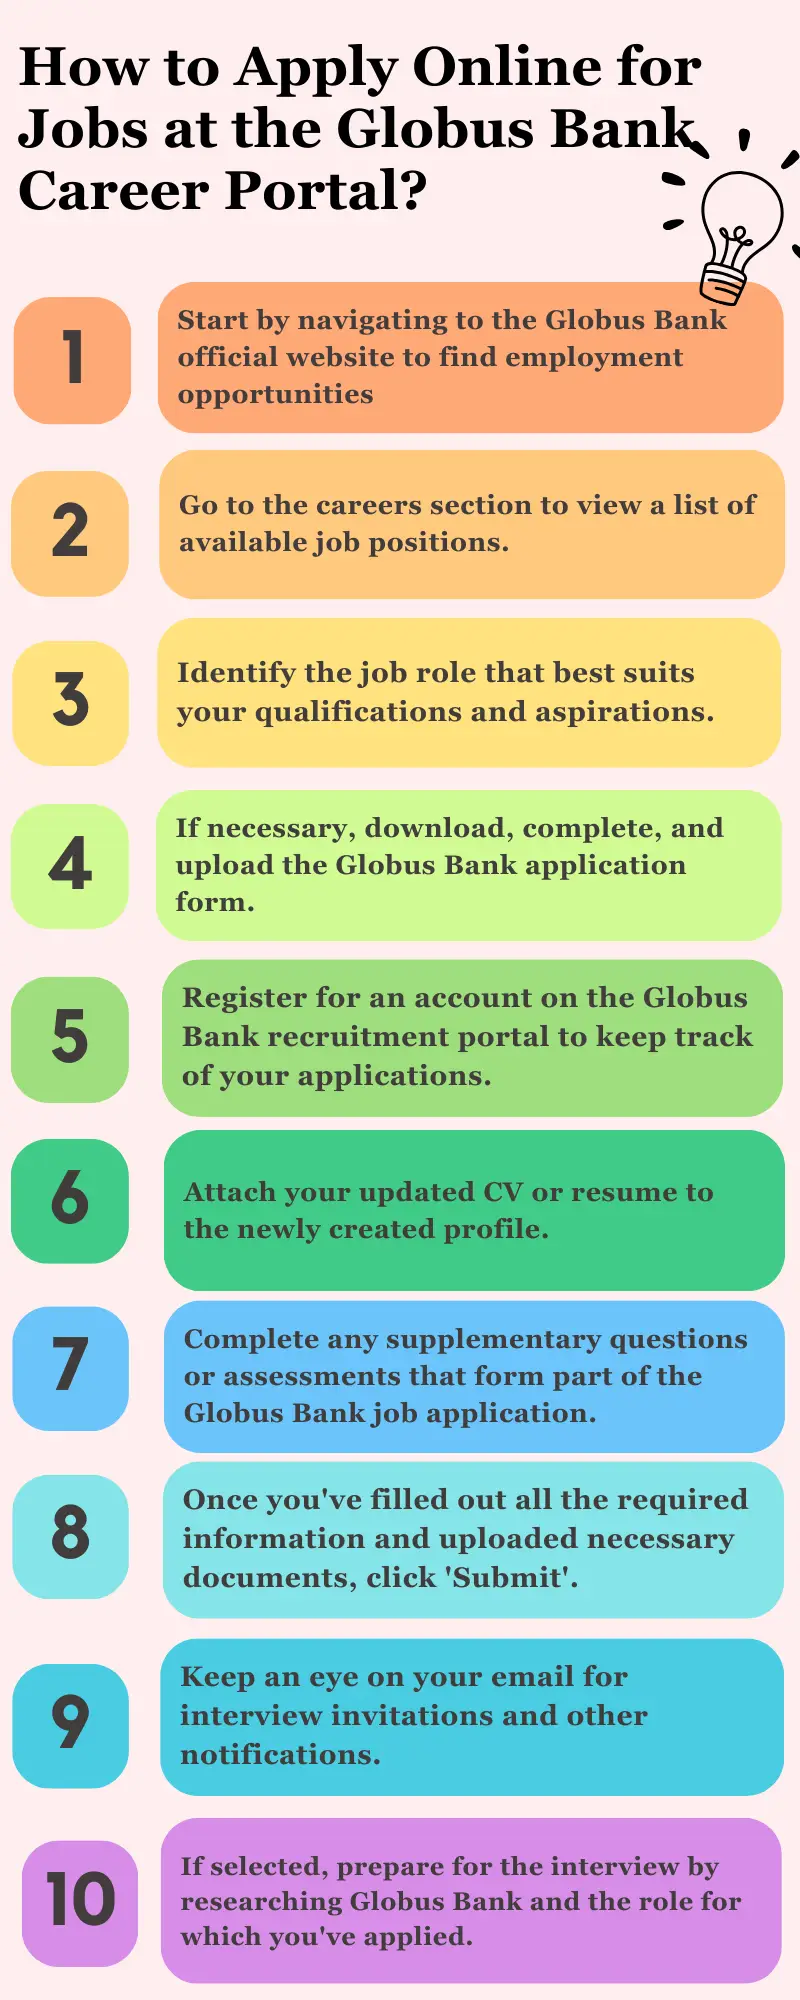 How to Apply Online for Jobs at the Globus Bank Career Portal?